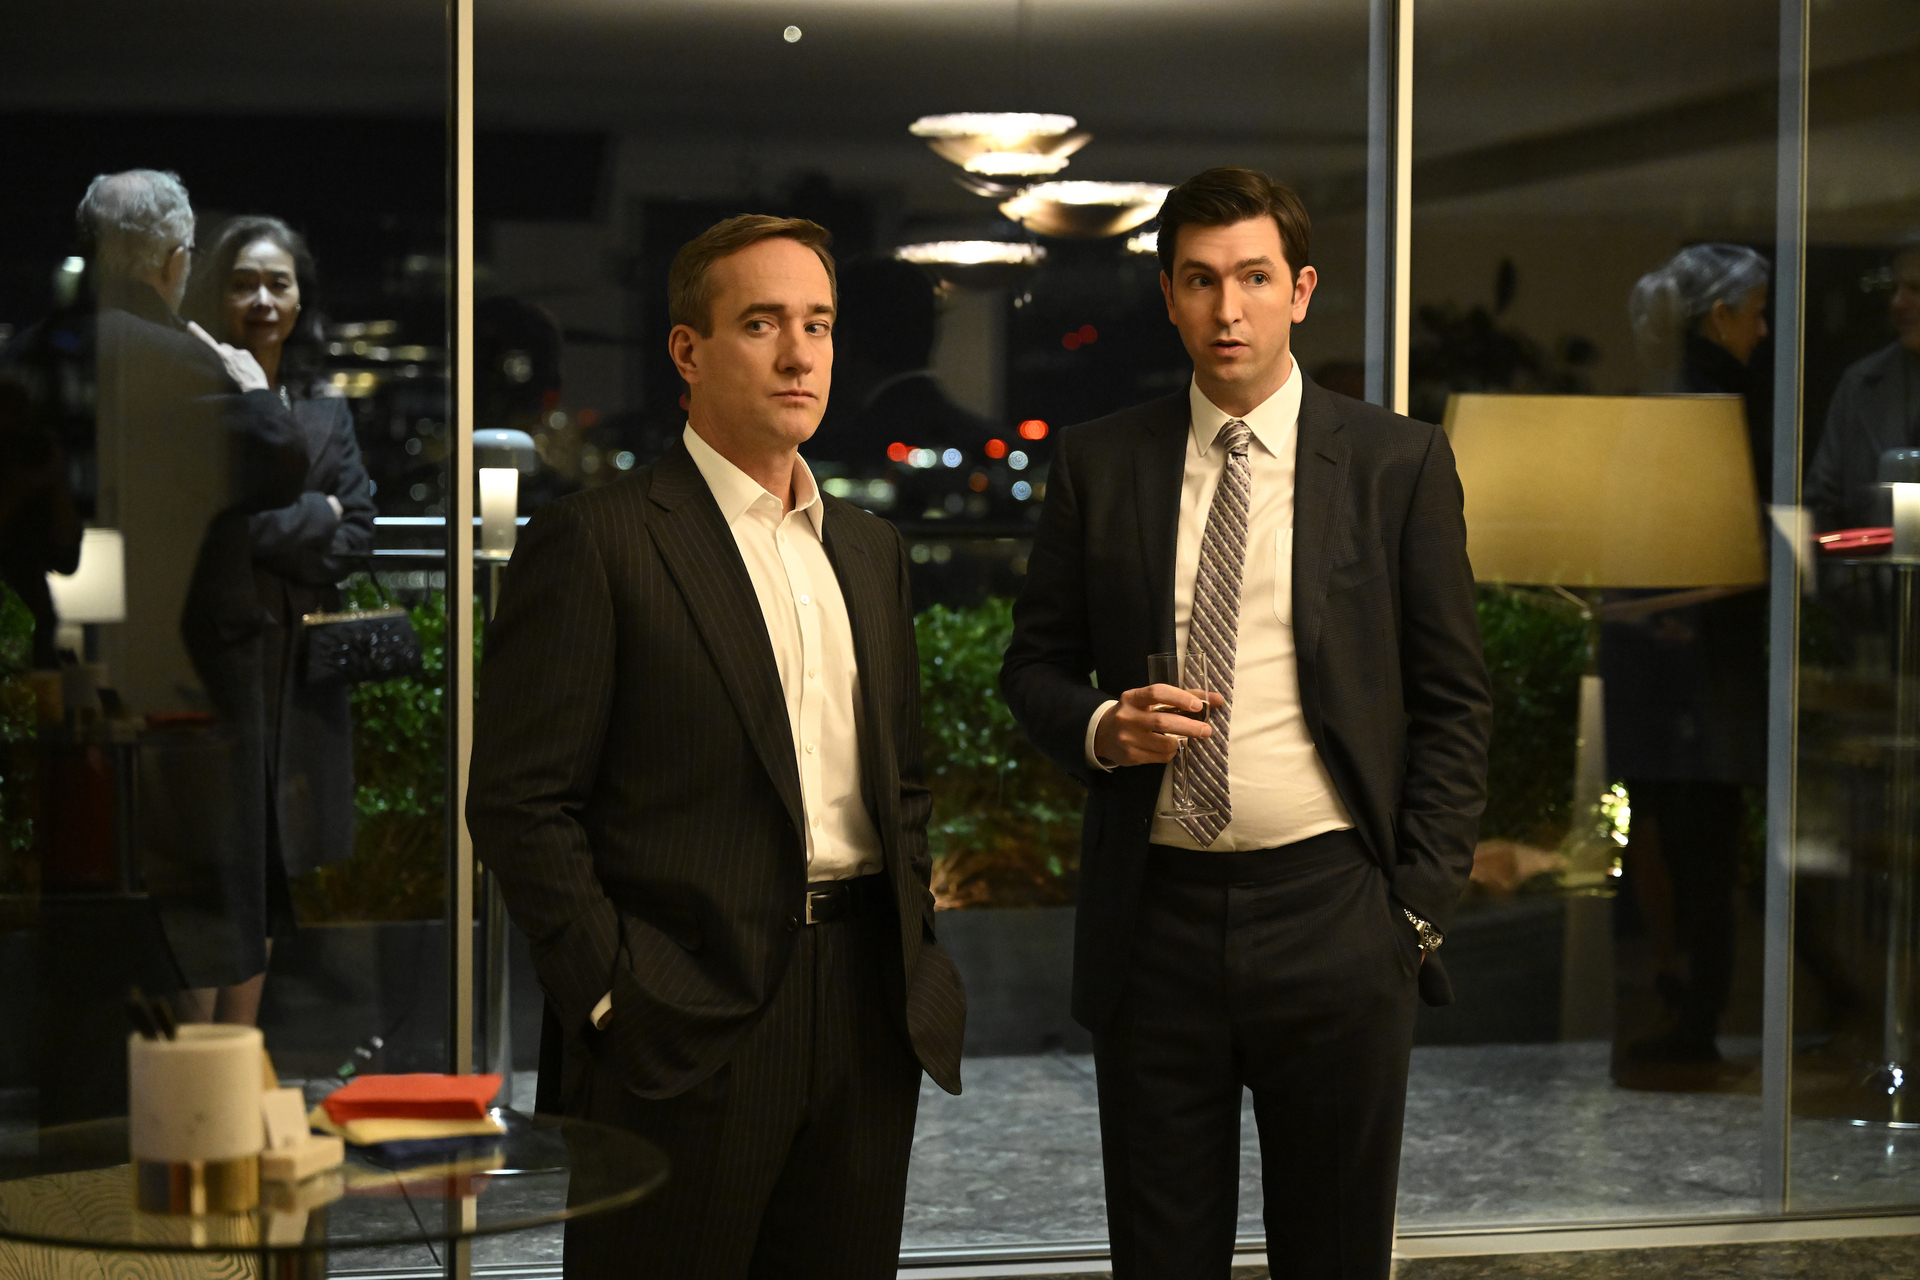 Matthew Macfadyen and Nicholas Braun standing at a party in a scene from Succession